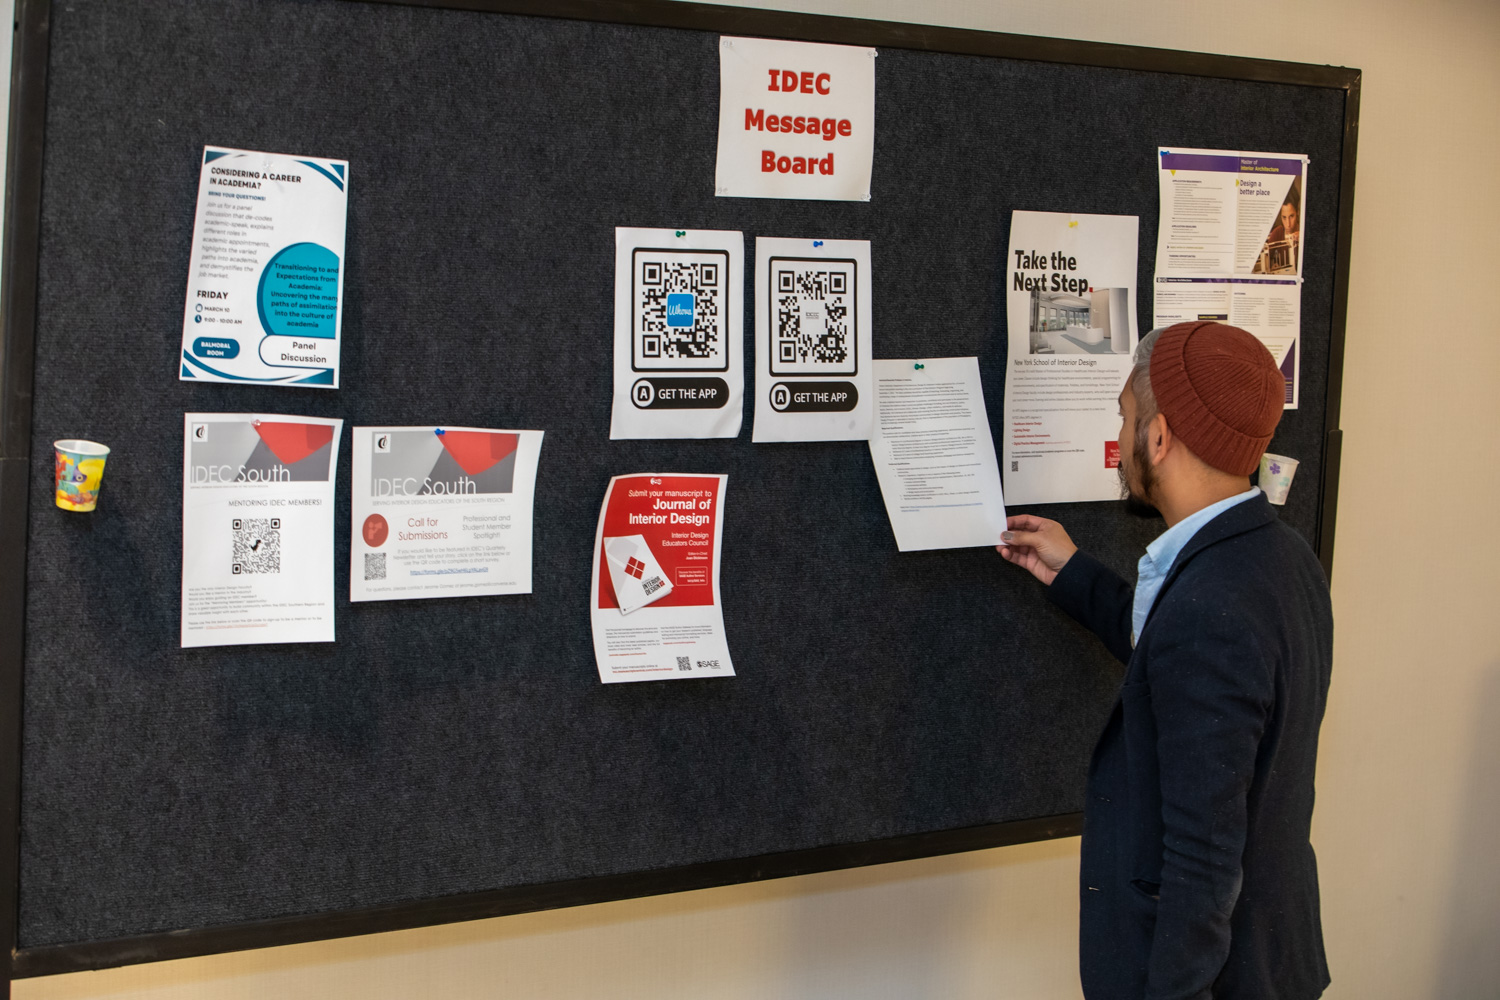 Conference-goer reading paper on bulletin board.